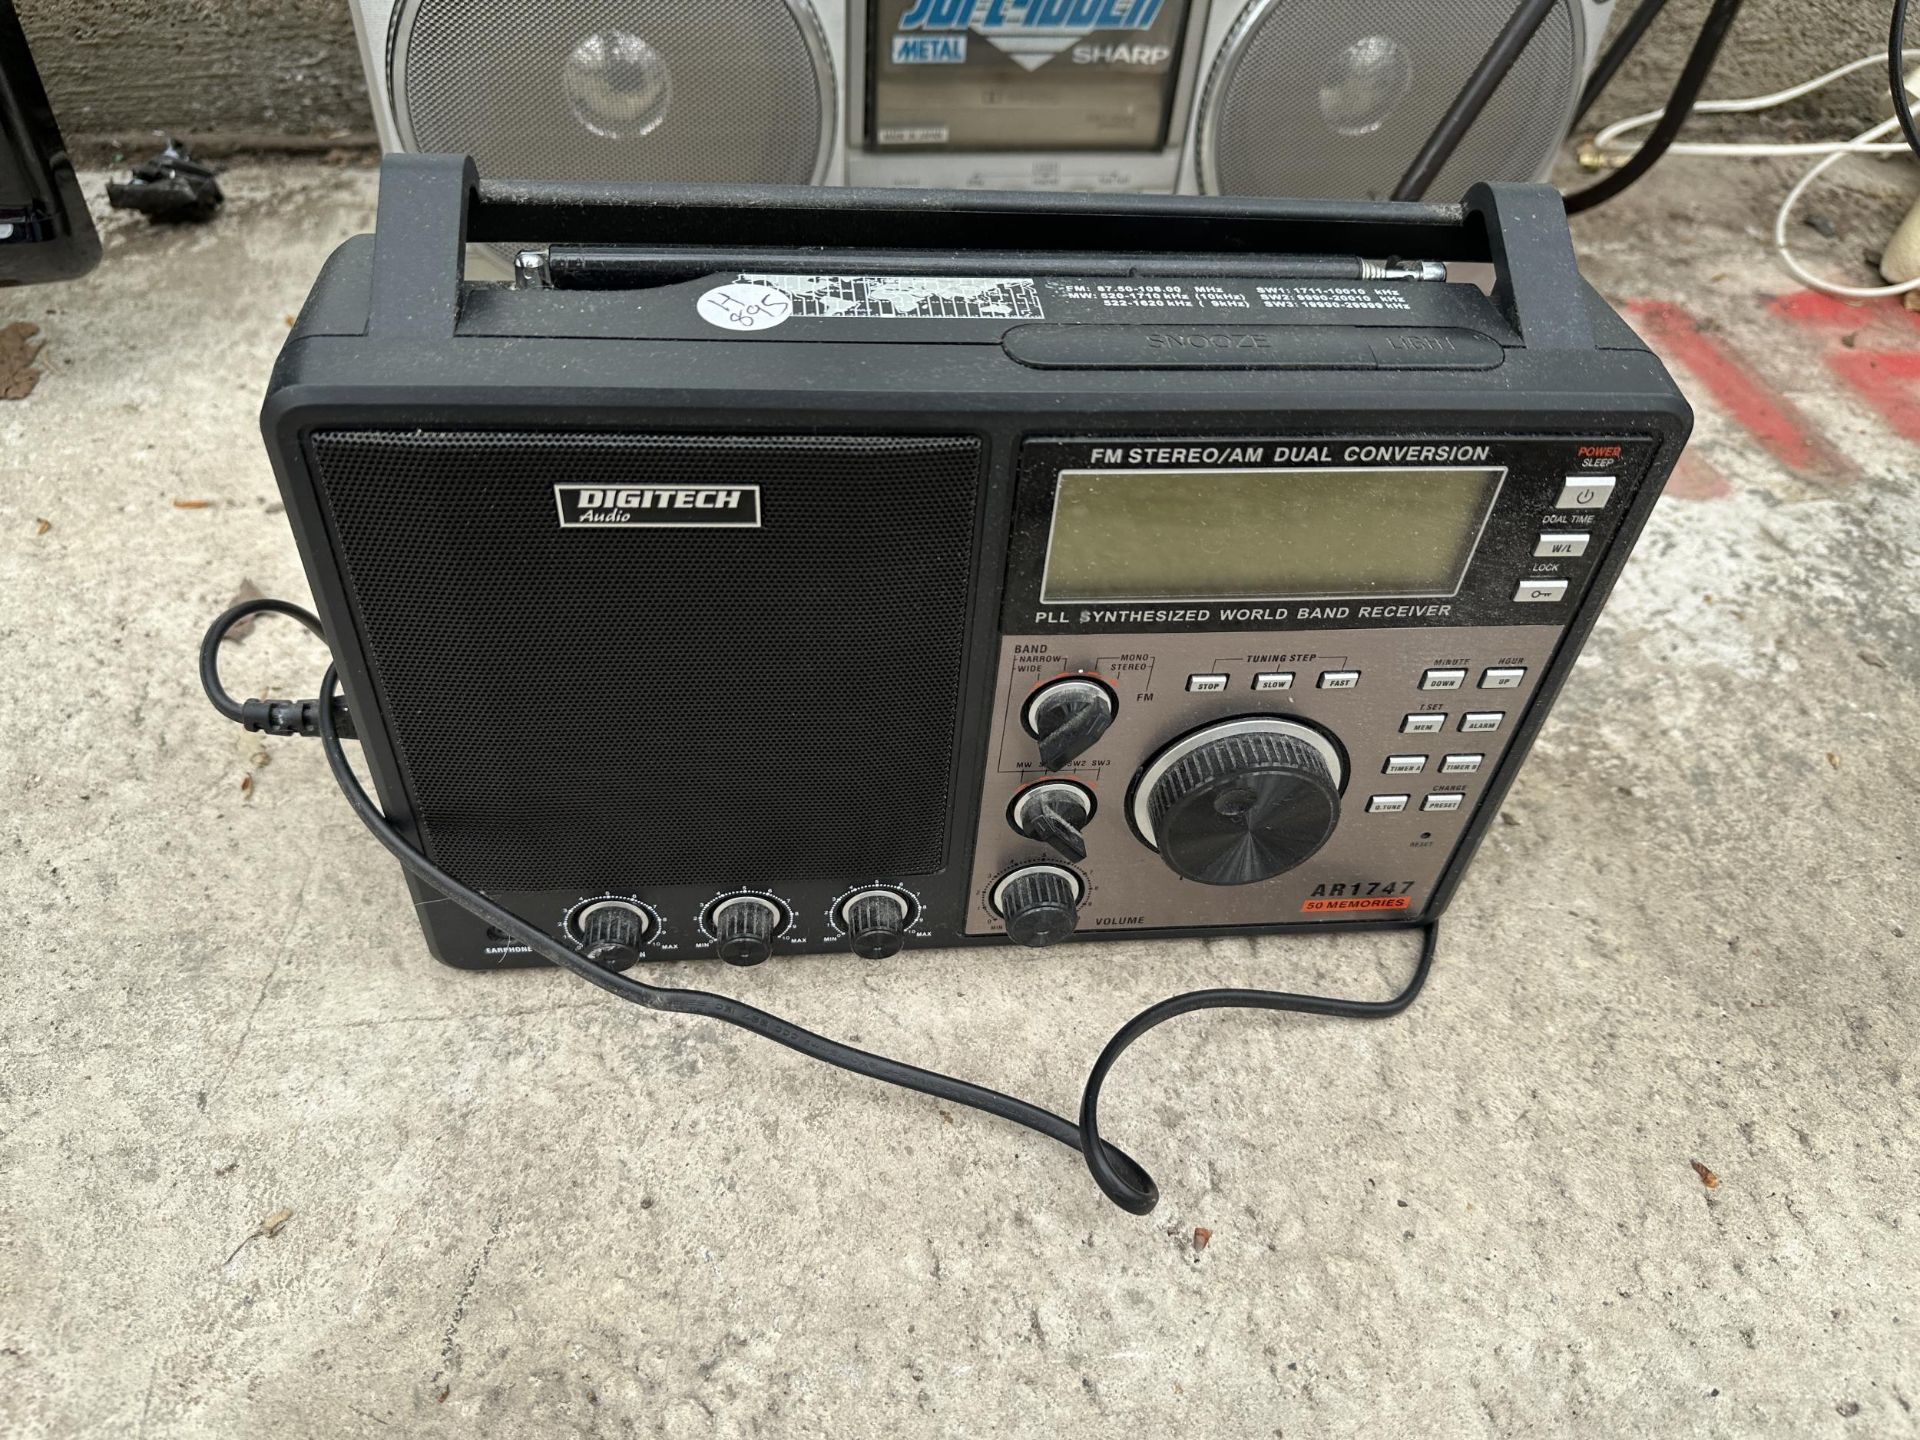 A RETRO SHARP RADIO/TAPE RECORDER AND A FURTHER DIGITECH RADIO - Image 2 of 3